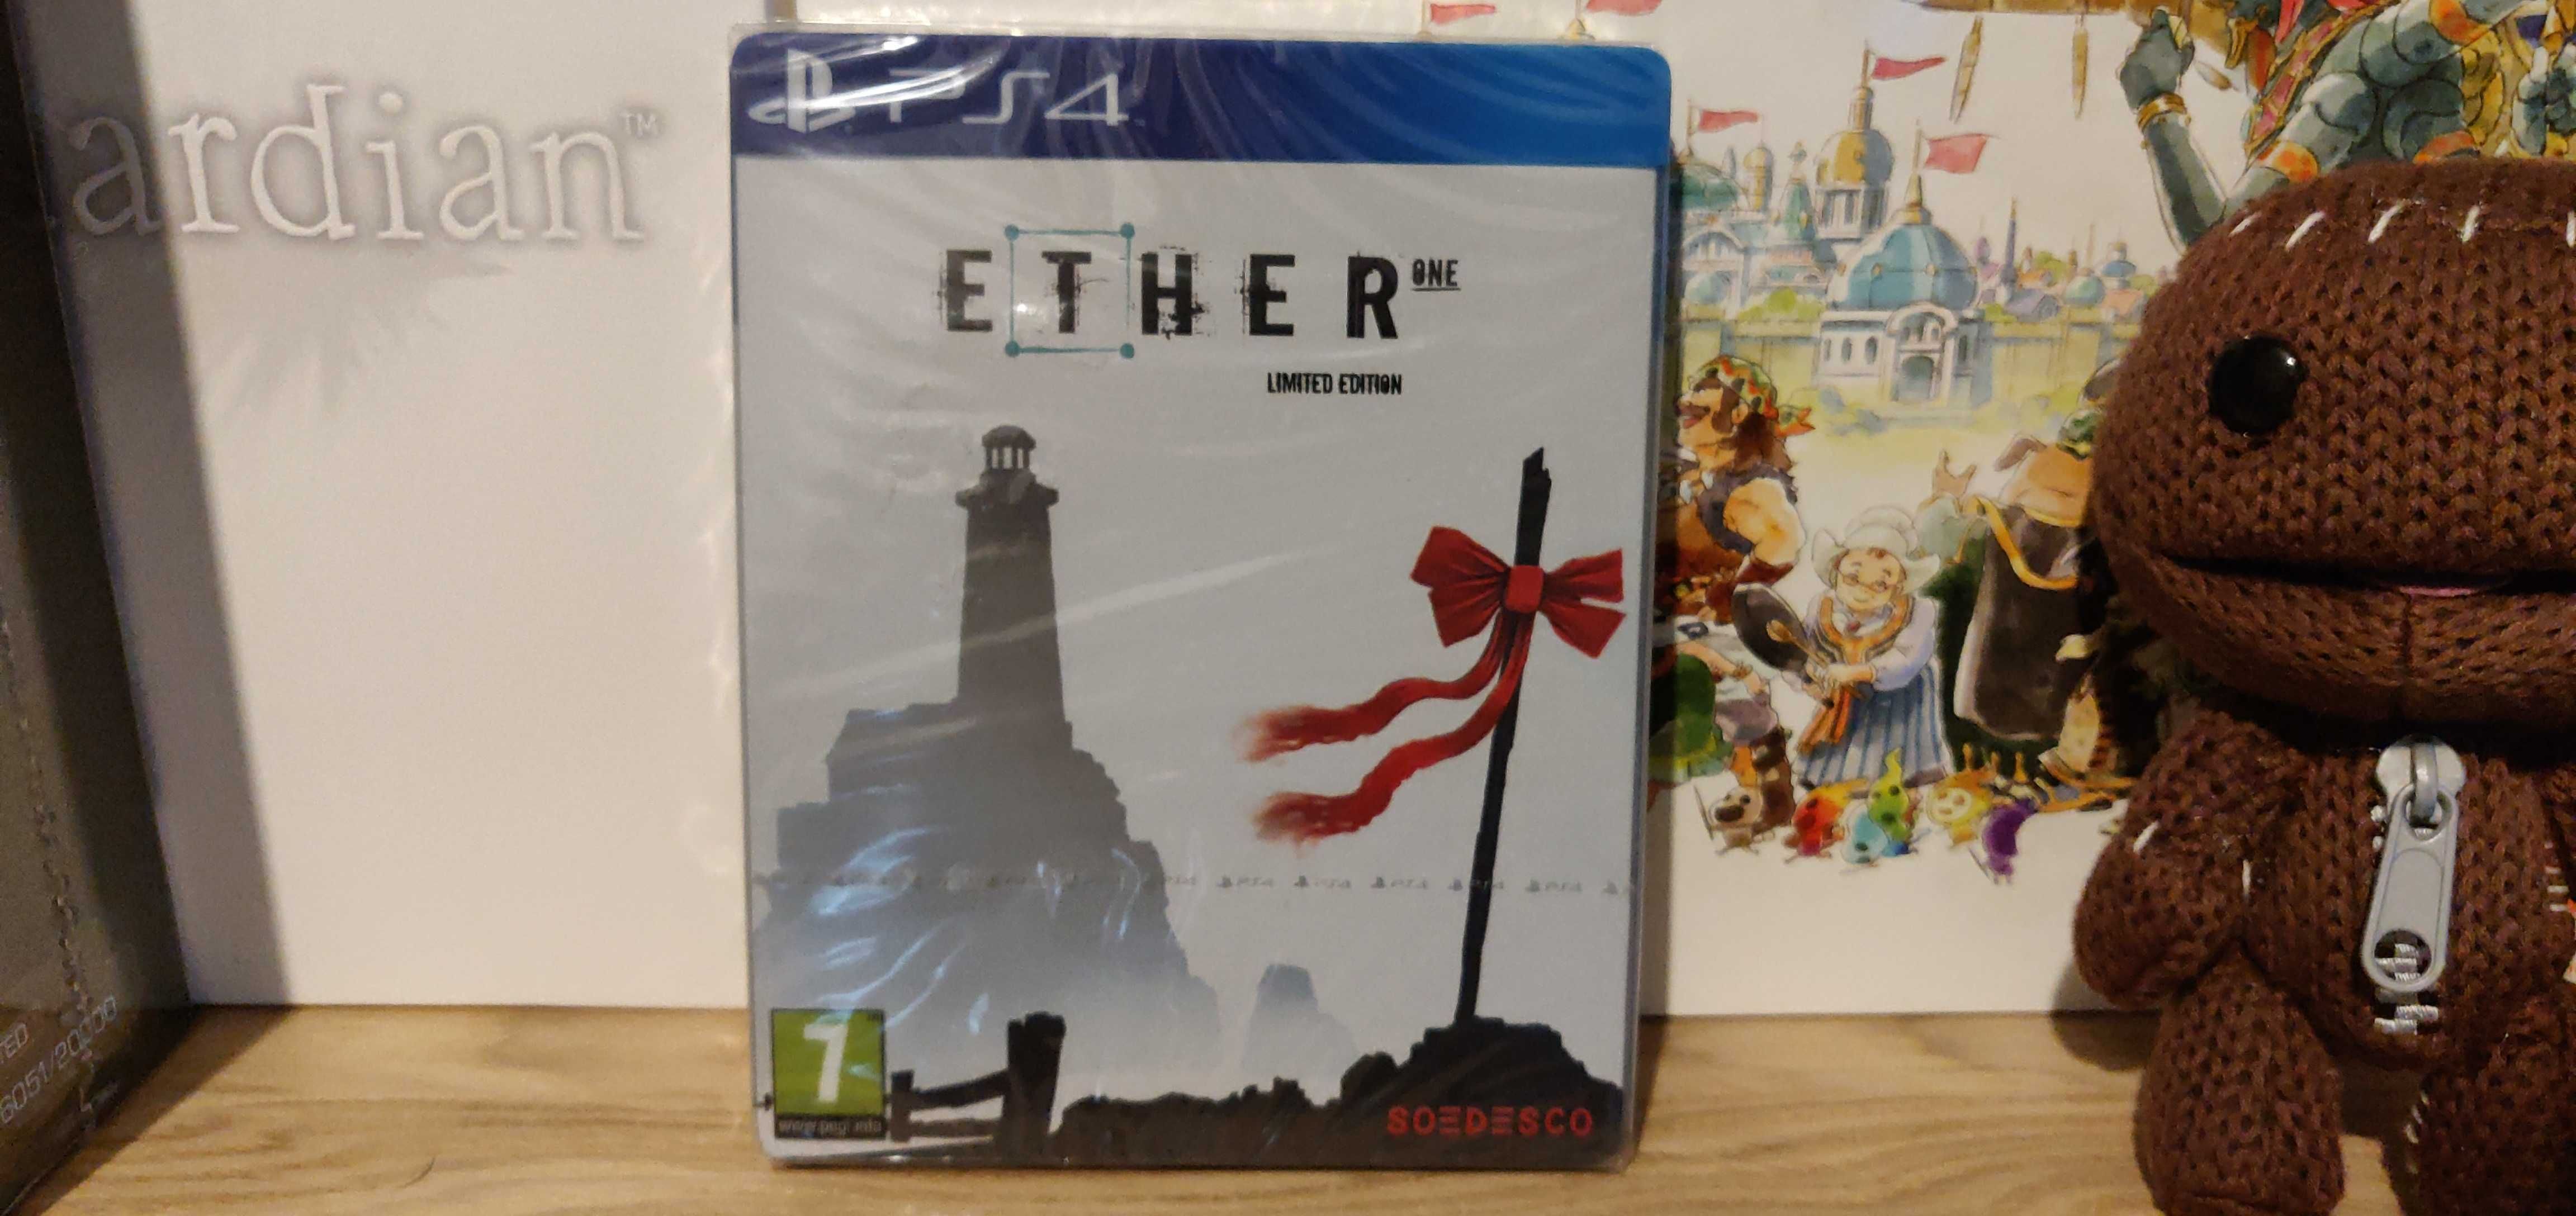 Ether One - Steelbook Edition